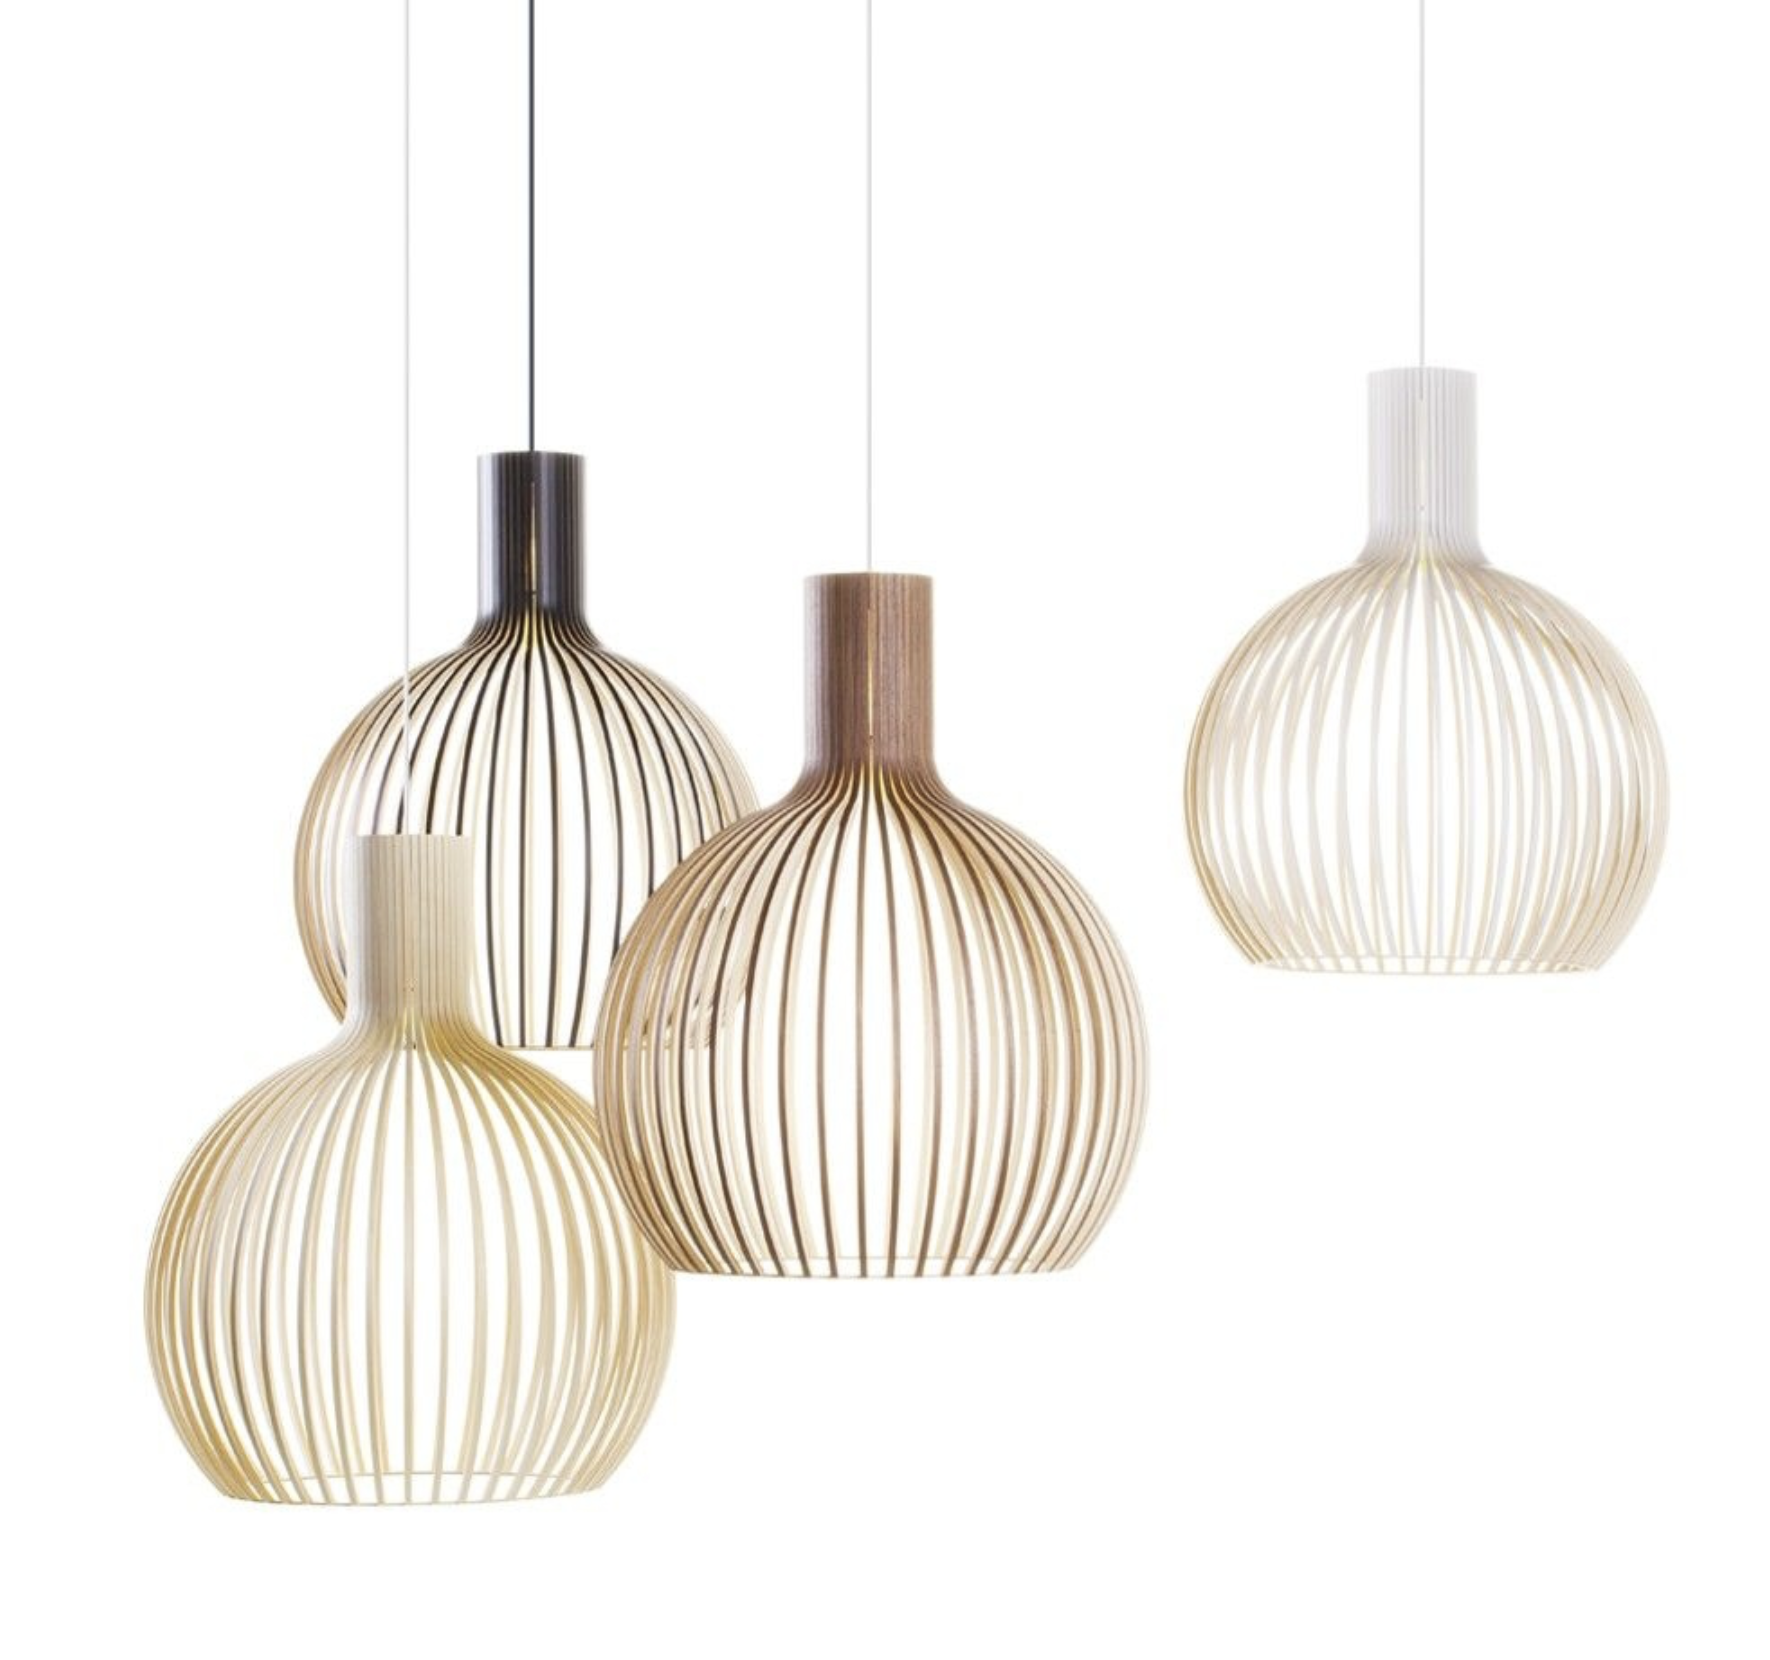  Finland's Secto Designs' large Octo 4240 pendant. Made from laminated strips of birch or walnut